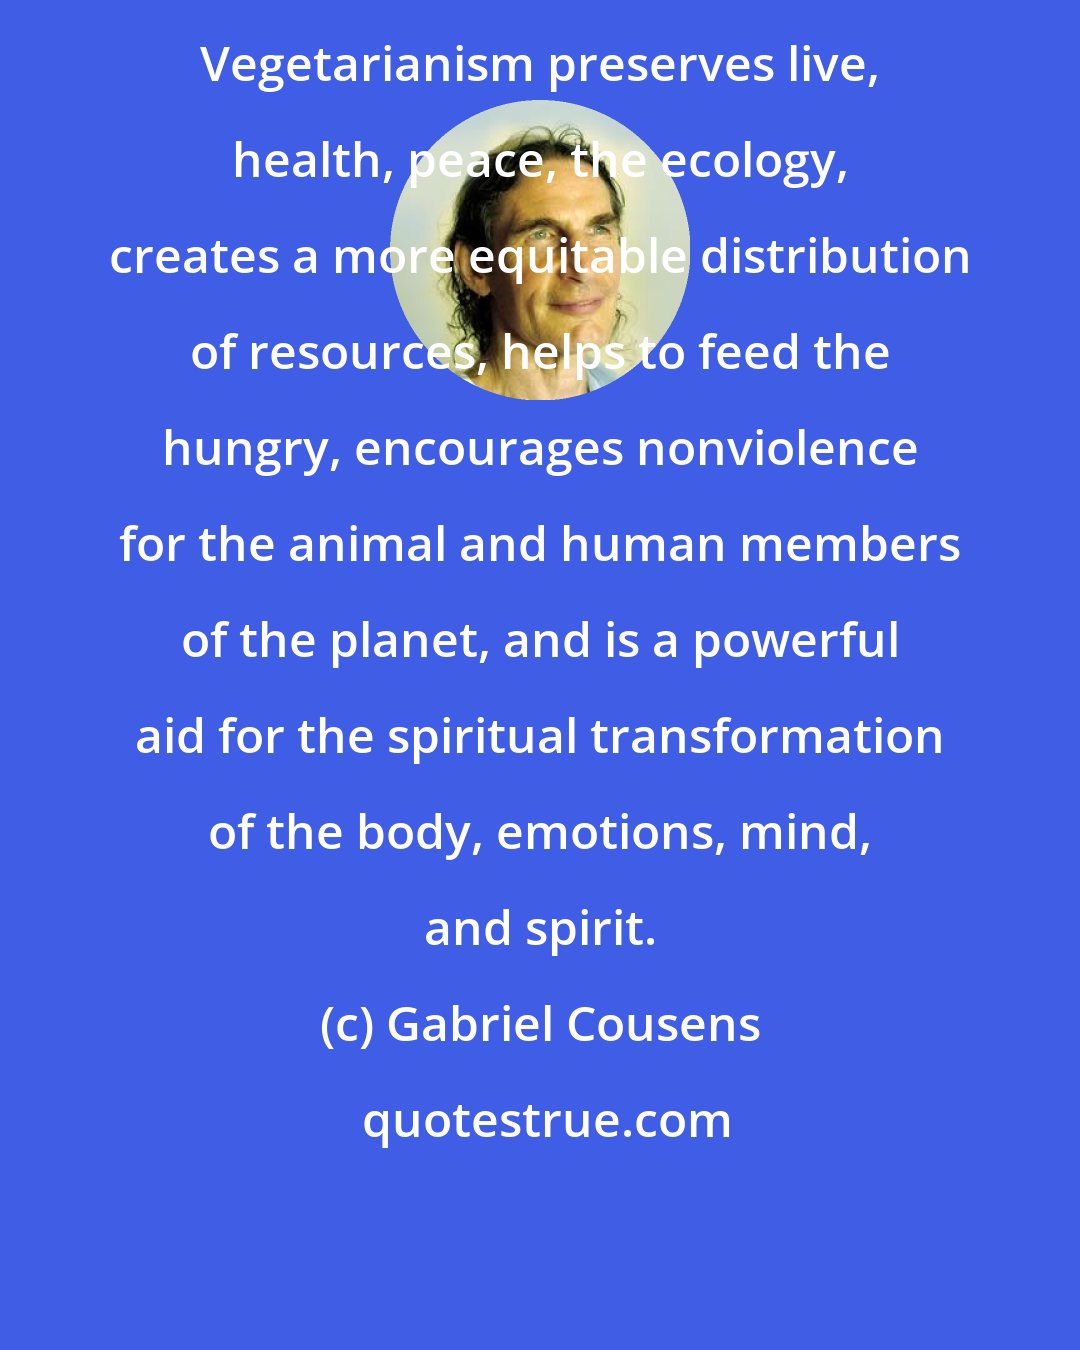 Gabriel Cousens: Vegetarianism preserves live, health, peace, the ecology, creates a more equitable distribution of resources, helps to feed the hungry, encourages nonviolence for the animal and human members of the planet, and is a powerful aid for the spiritual transformation of the body, emotions, mind, and spirit.